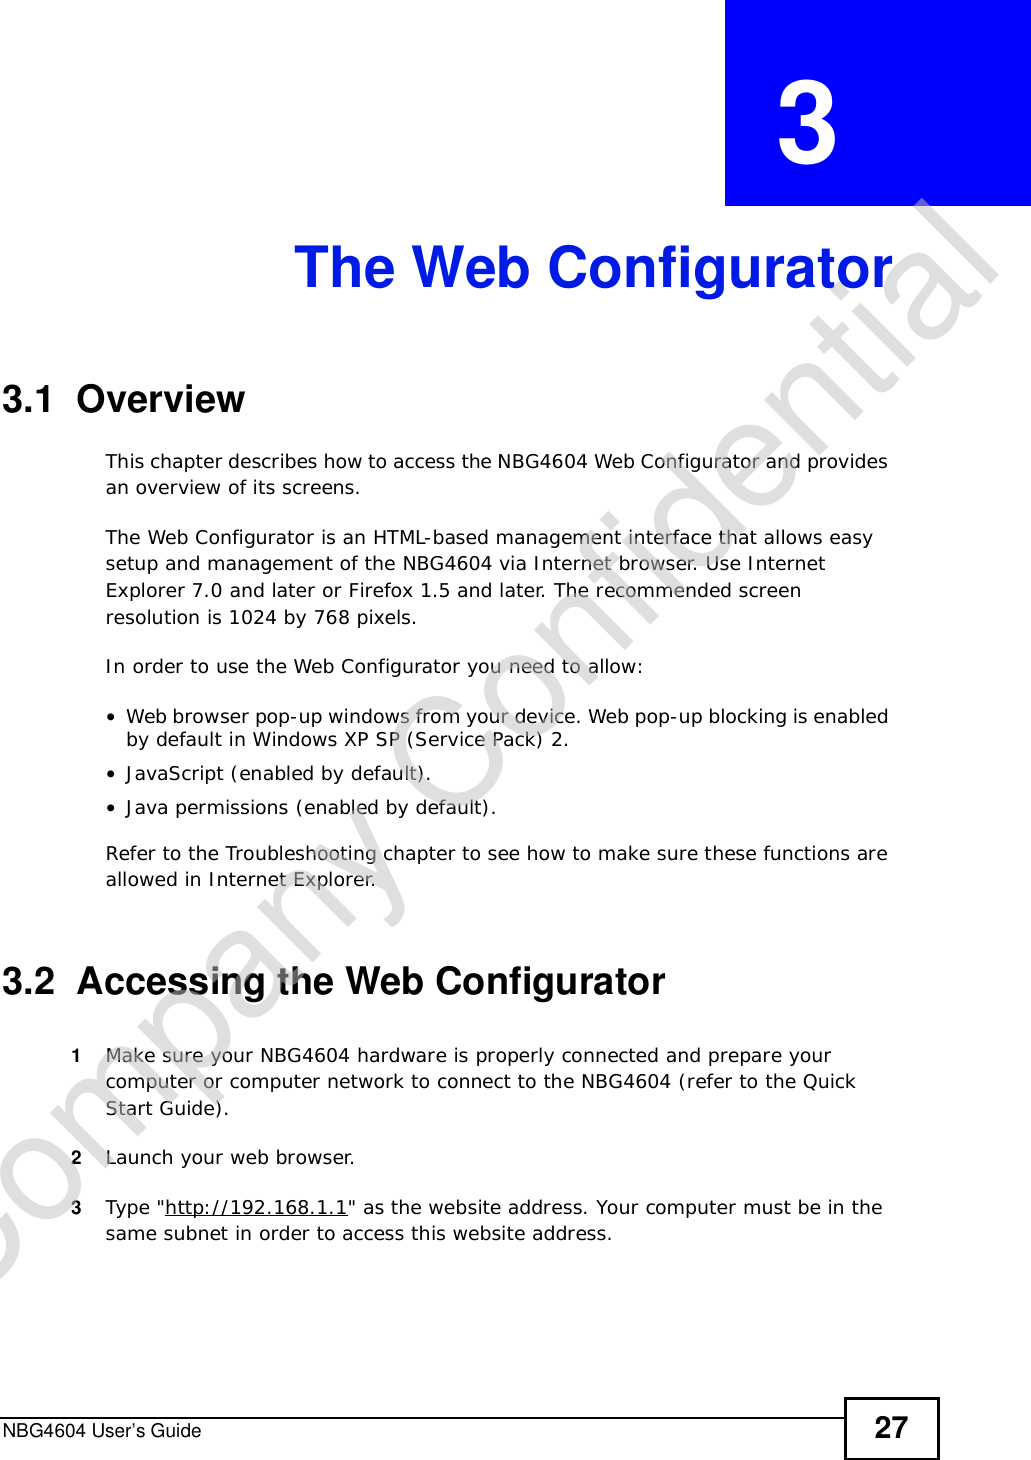 NBG4604 User’s Guide 27CHAPTER  3 The Web Configurator3.1  OverviewThis chapter describes how to access the NBG4604 Web Configurator and provides an overview of its screens.The Web Configurator is an HTML-based management interface that allows easy setup and management of the NBG4604 via Internet browser. Use Internet Explorer 7.0 and later or Firefox 1.5 and later. The recommended screen resolution is 1024 by 768 pixels.In order to use the Web Configurator you need to allow:•Web browser pop-up windows from your device. Web pop-up blocking is enabled by default in Windows XP SP (Service Pack) 2.•JavaScript (enabled by default).•Java permissions (enabled by default).Refer to the Troubleshooting chapter to see how to make sure these functions are allowed in Internet Explorer.3.2  Accessing the Web Configurator1Make sure your NBG4604 hardware is properly connected and prepare your computer or computer network to connect to the NBG4604 (refer to the Quick Start Guide).2Launch your web browser.3Type &quot;http://192.168.1.1&quot; as the website address. Your computer must be in the same subnet in order to access this website address.Company Confidential